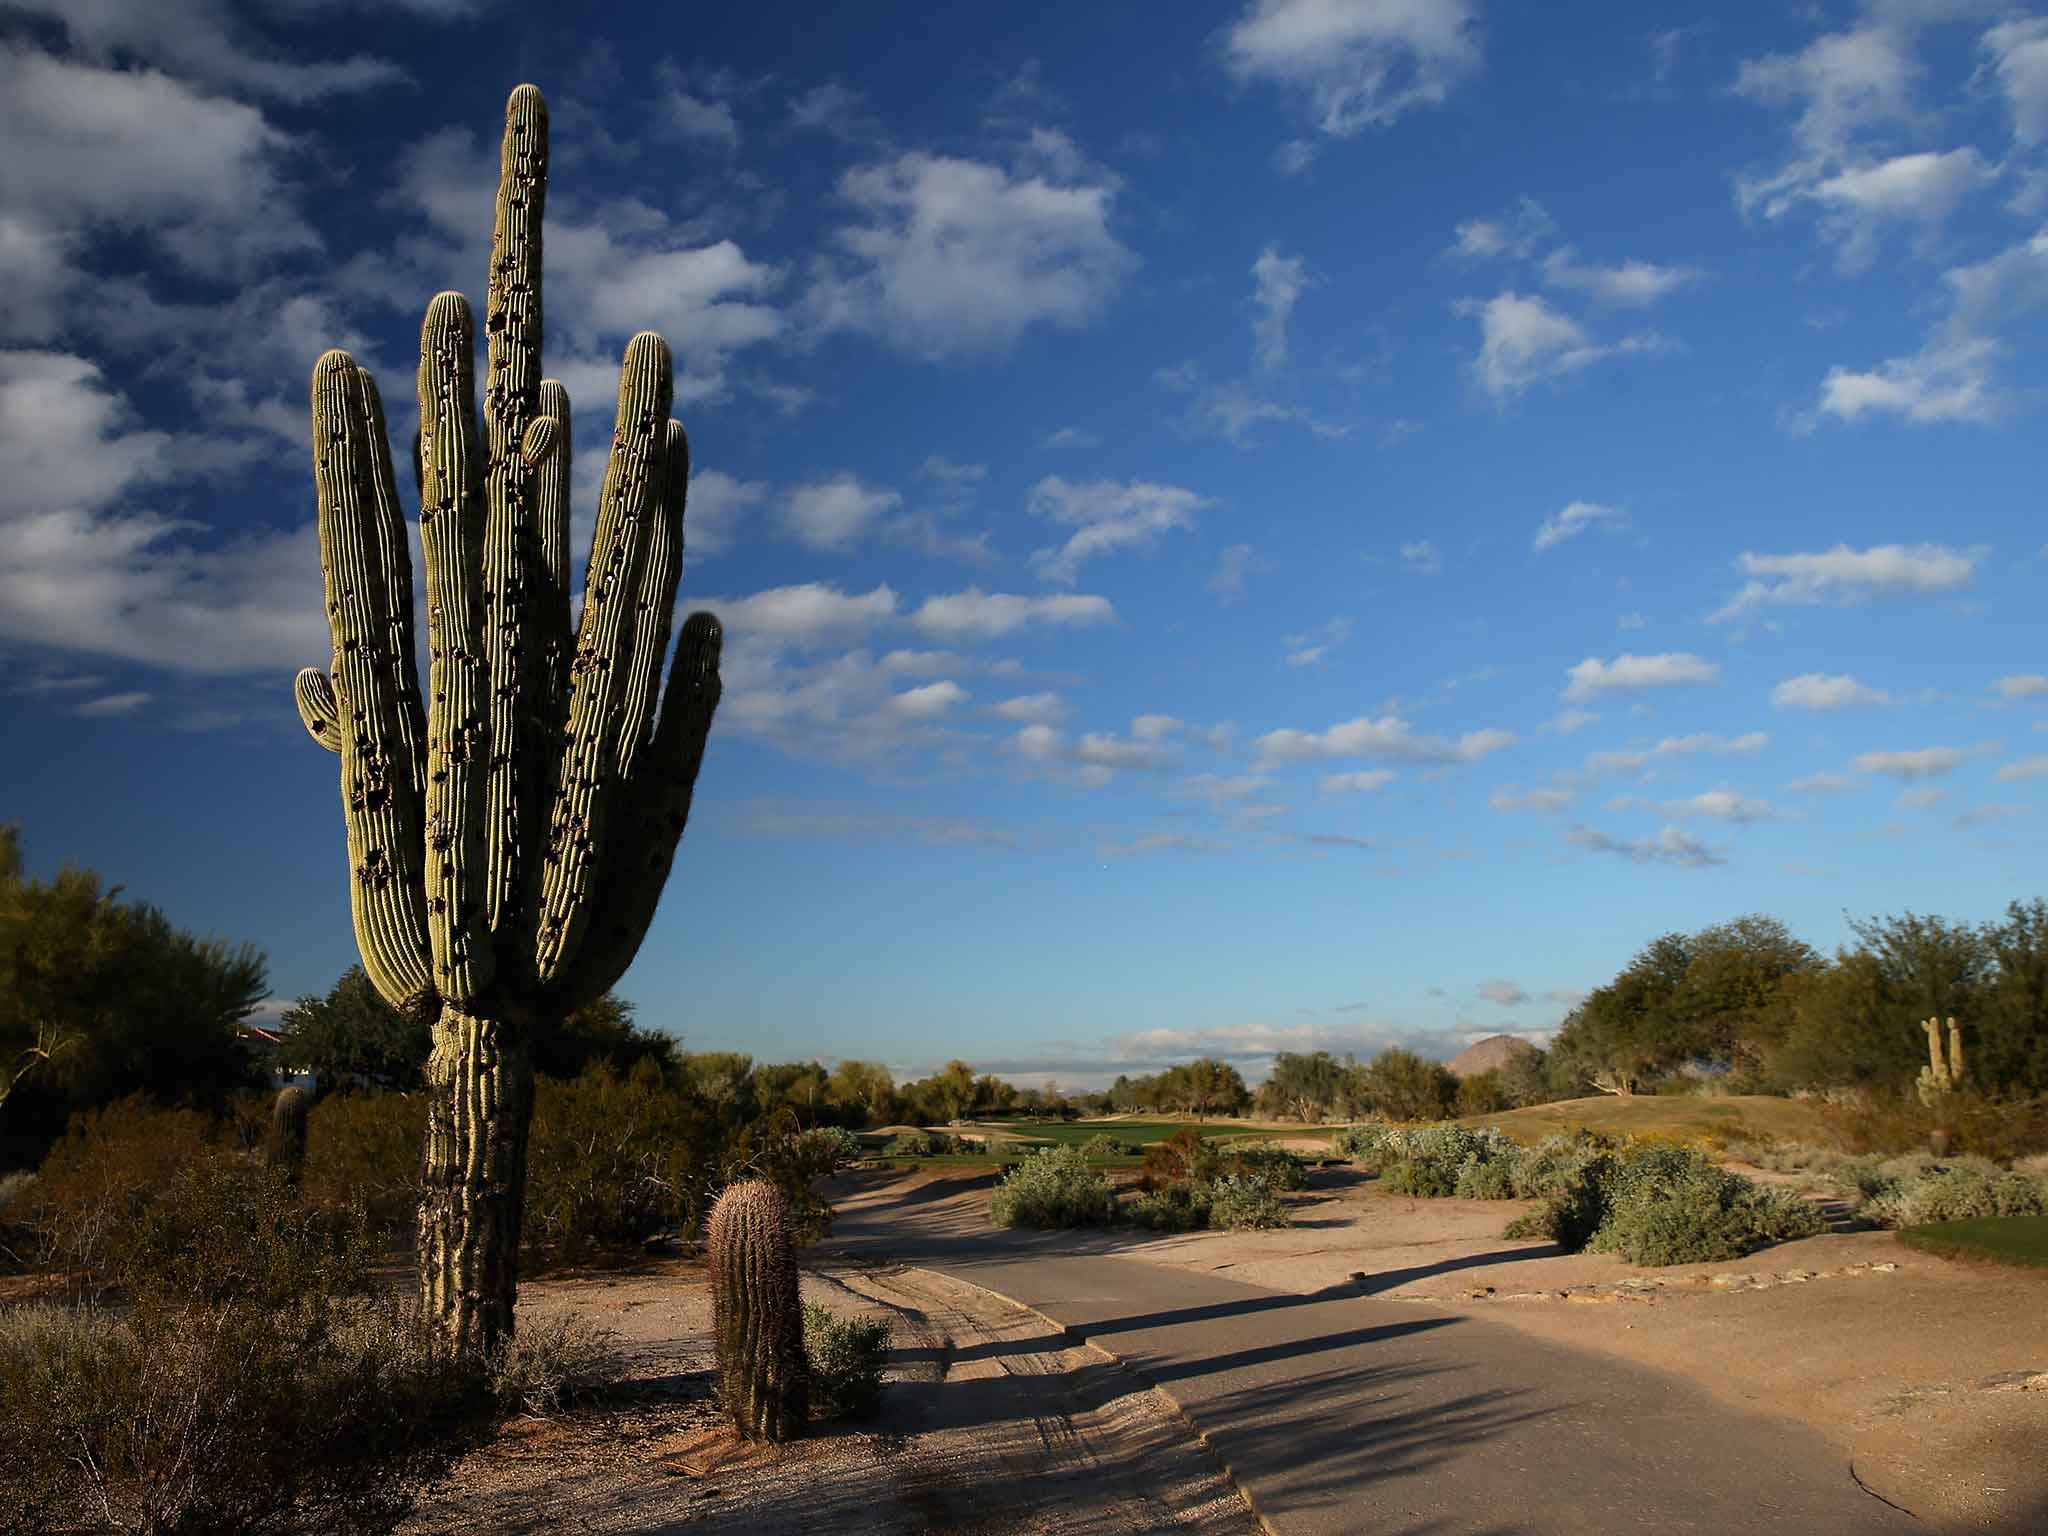 Cacti are now the fifth most endangered major group on the IUCN’s 'red list' of threatened species